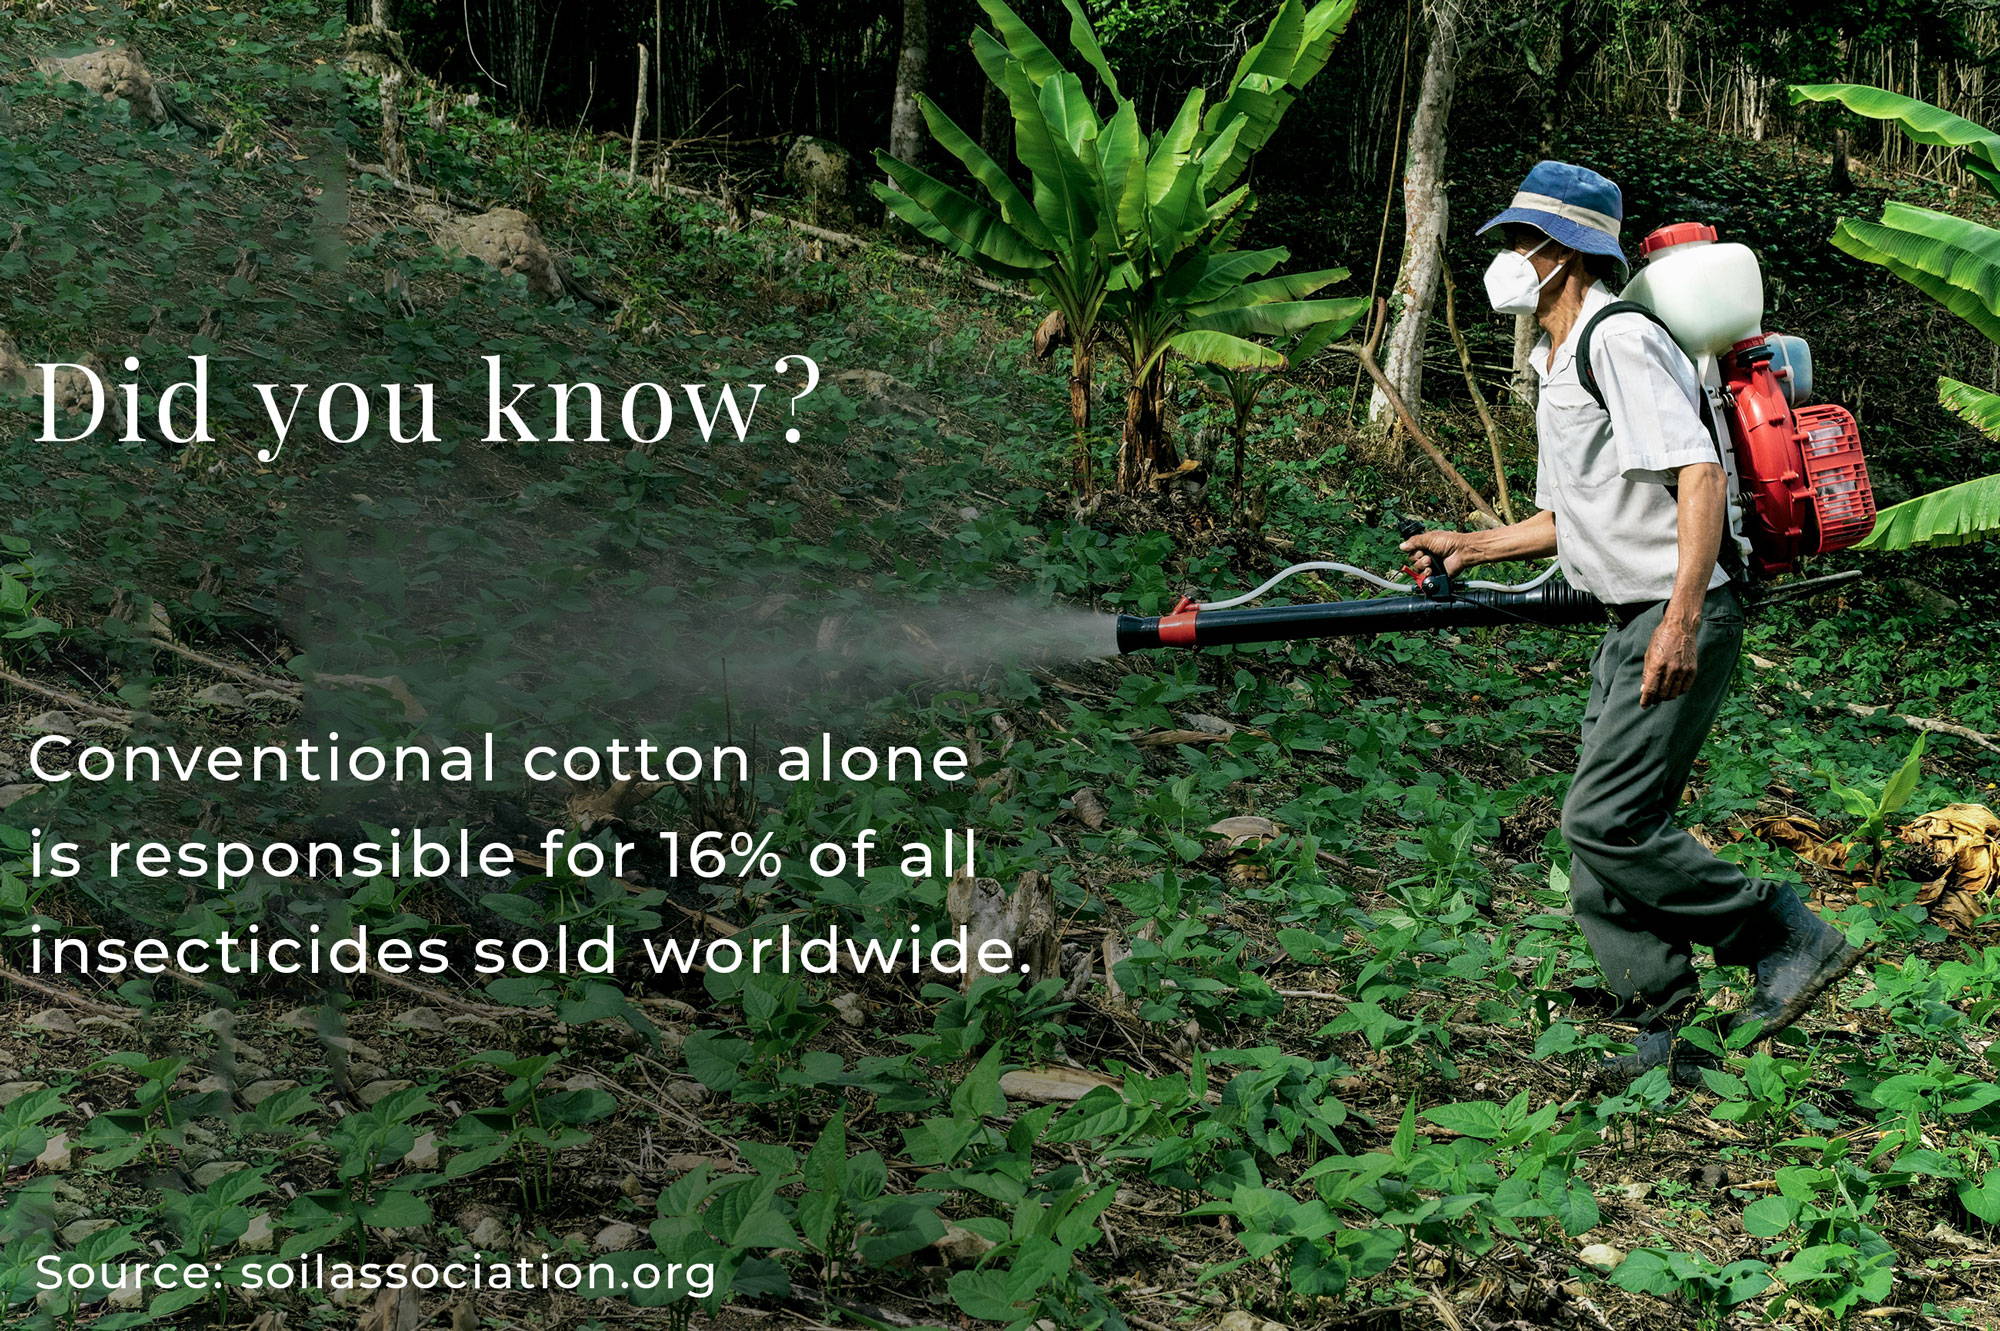 Conventional cotton alone is responsible for 16% of all insecticides sold worldwide.